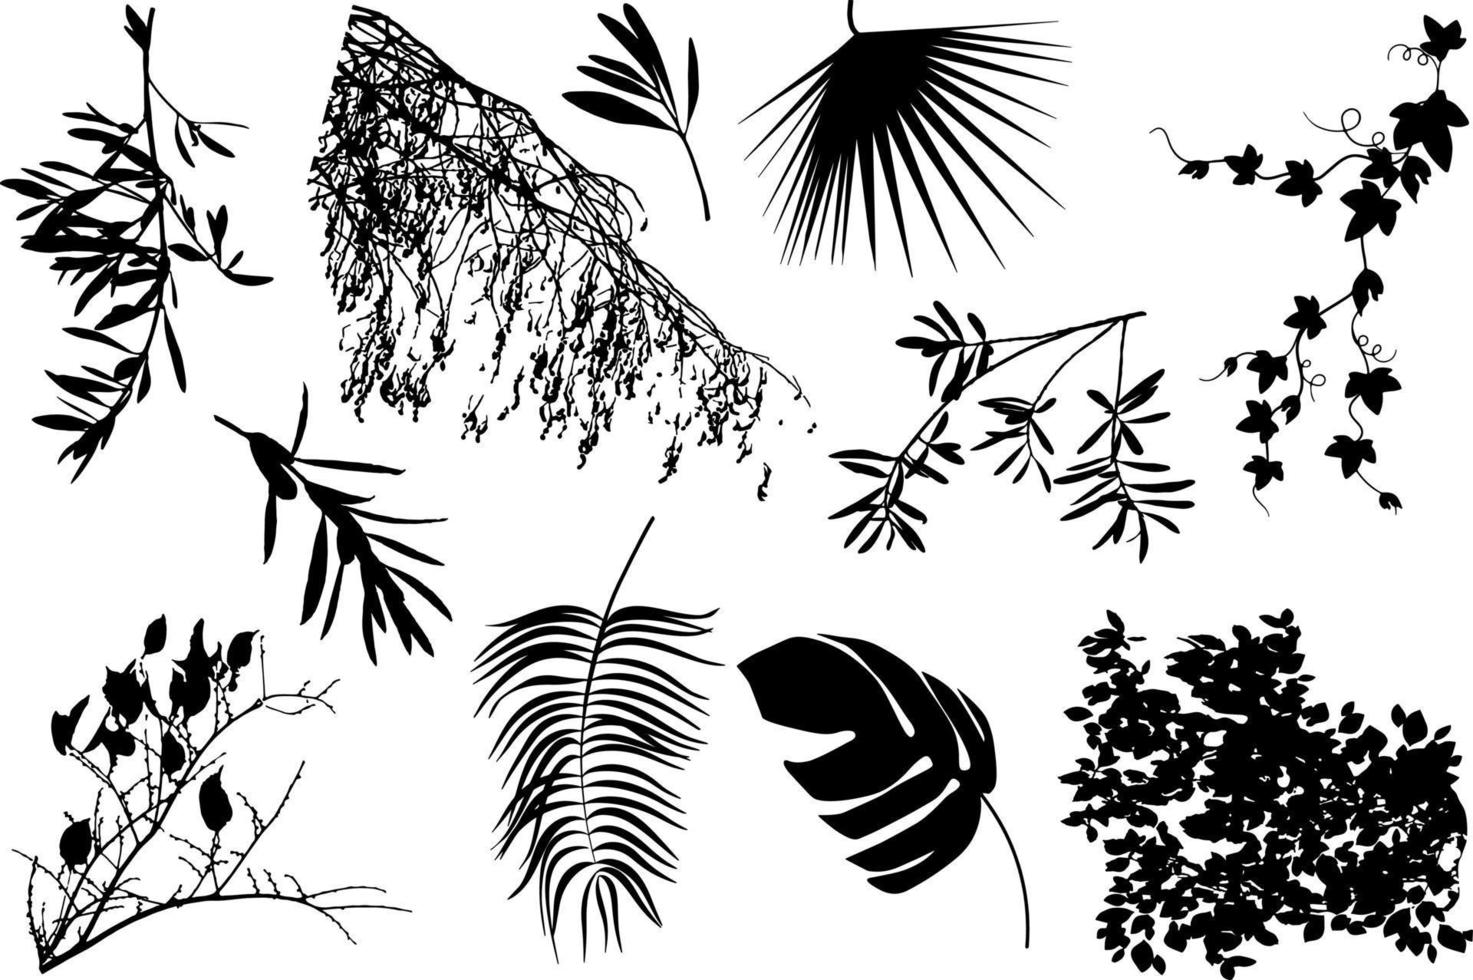 Monochrome silhouette of leaves, branches and flowers. vector